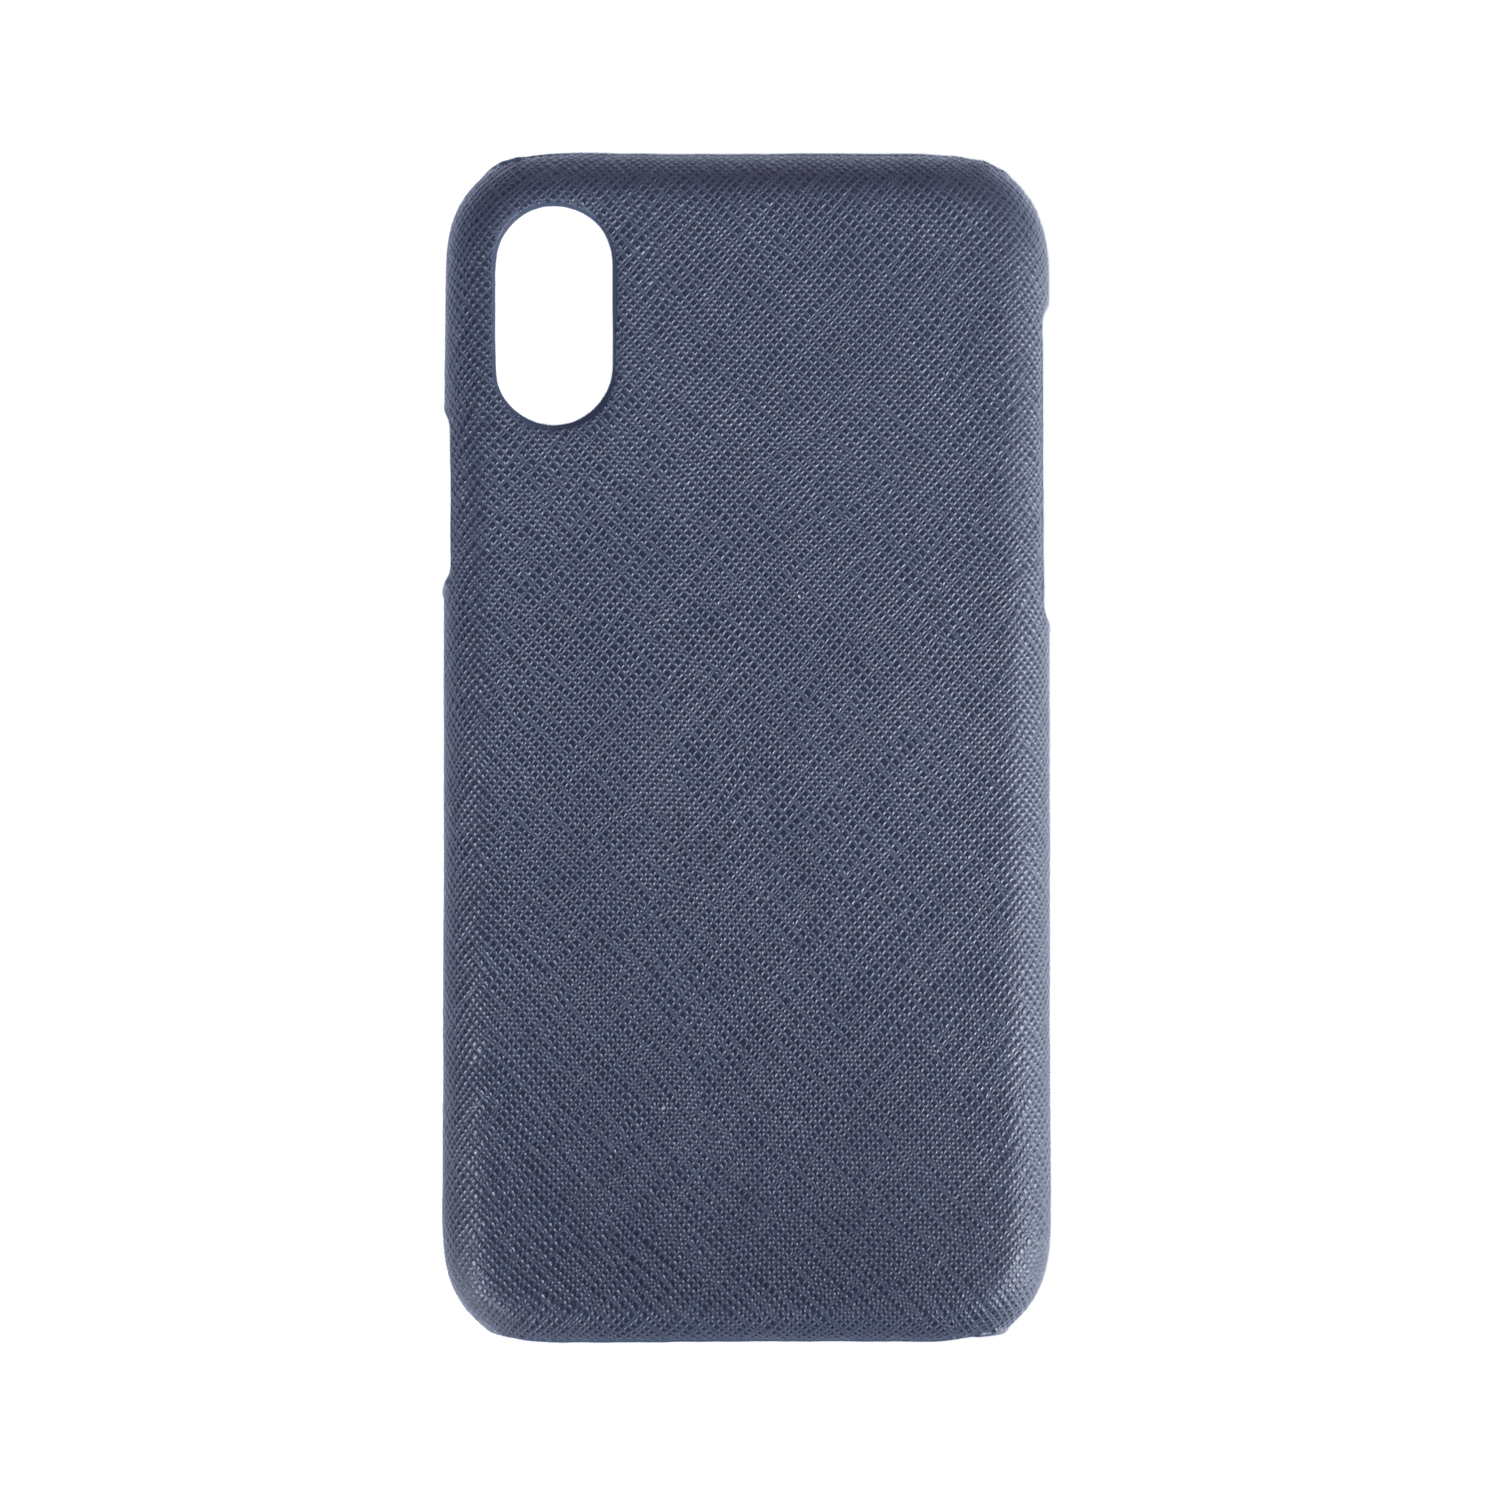 iPhone X/XS Max Case Navy - Personal Press